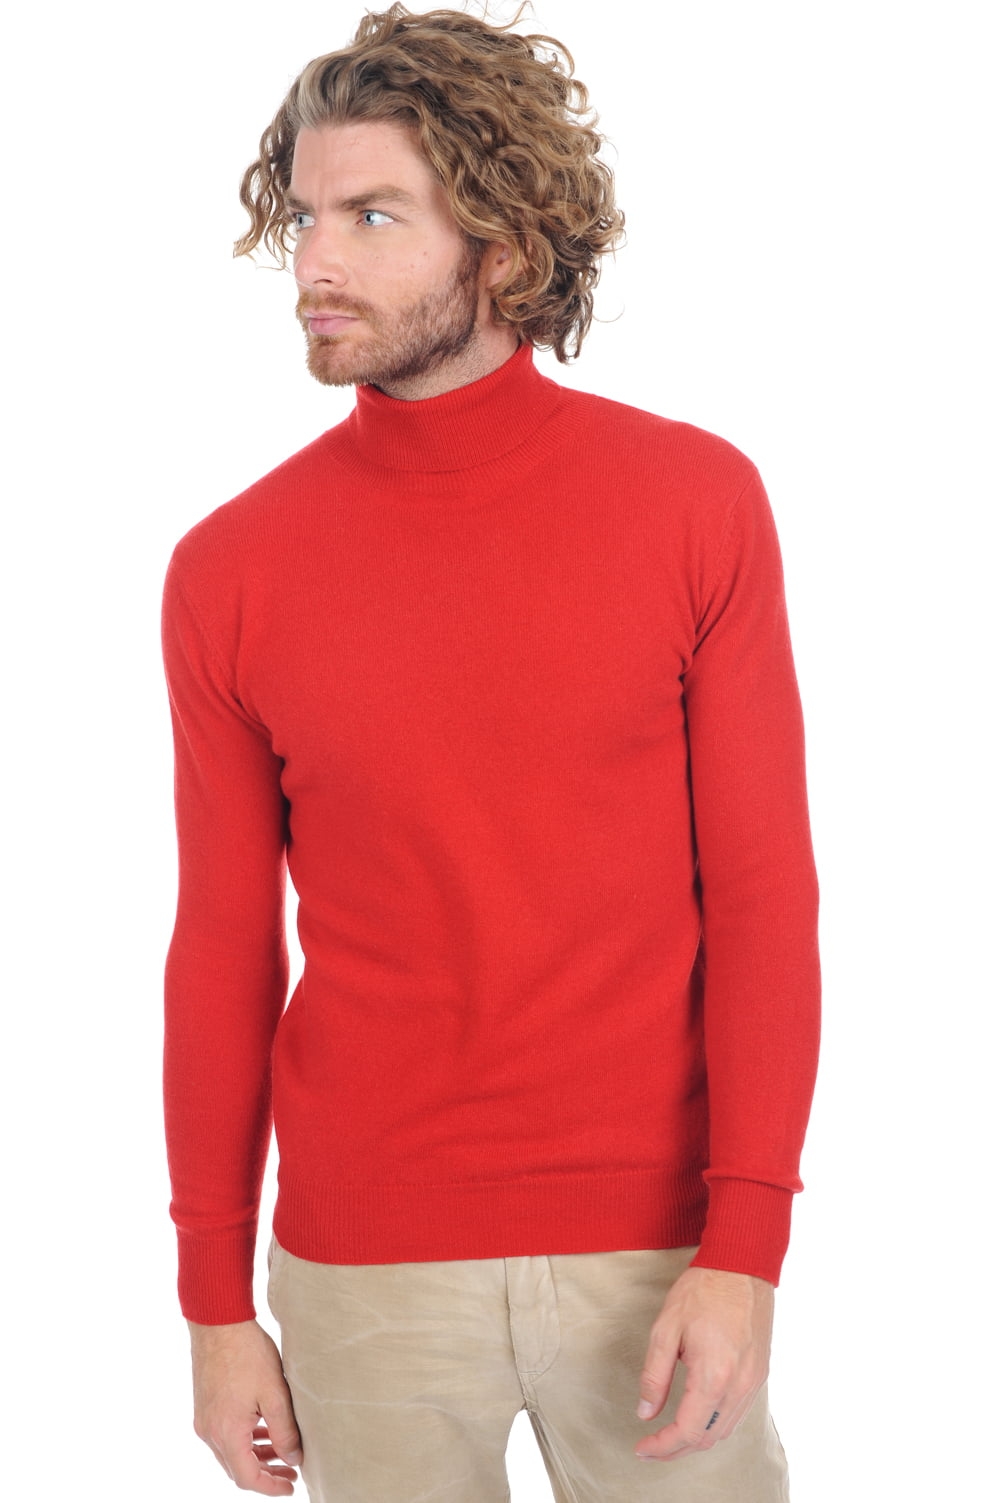 Cachemire petits prix homme tarry first ultra red l